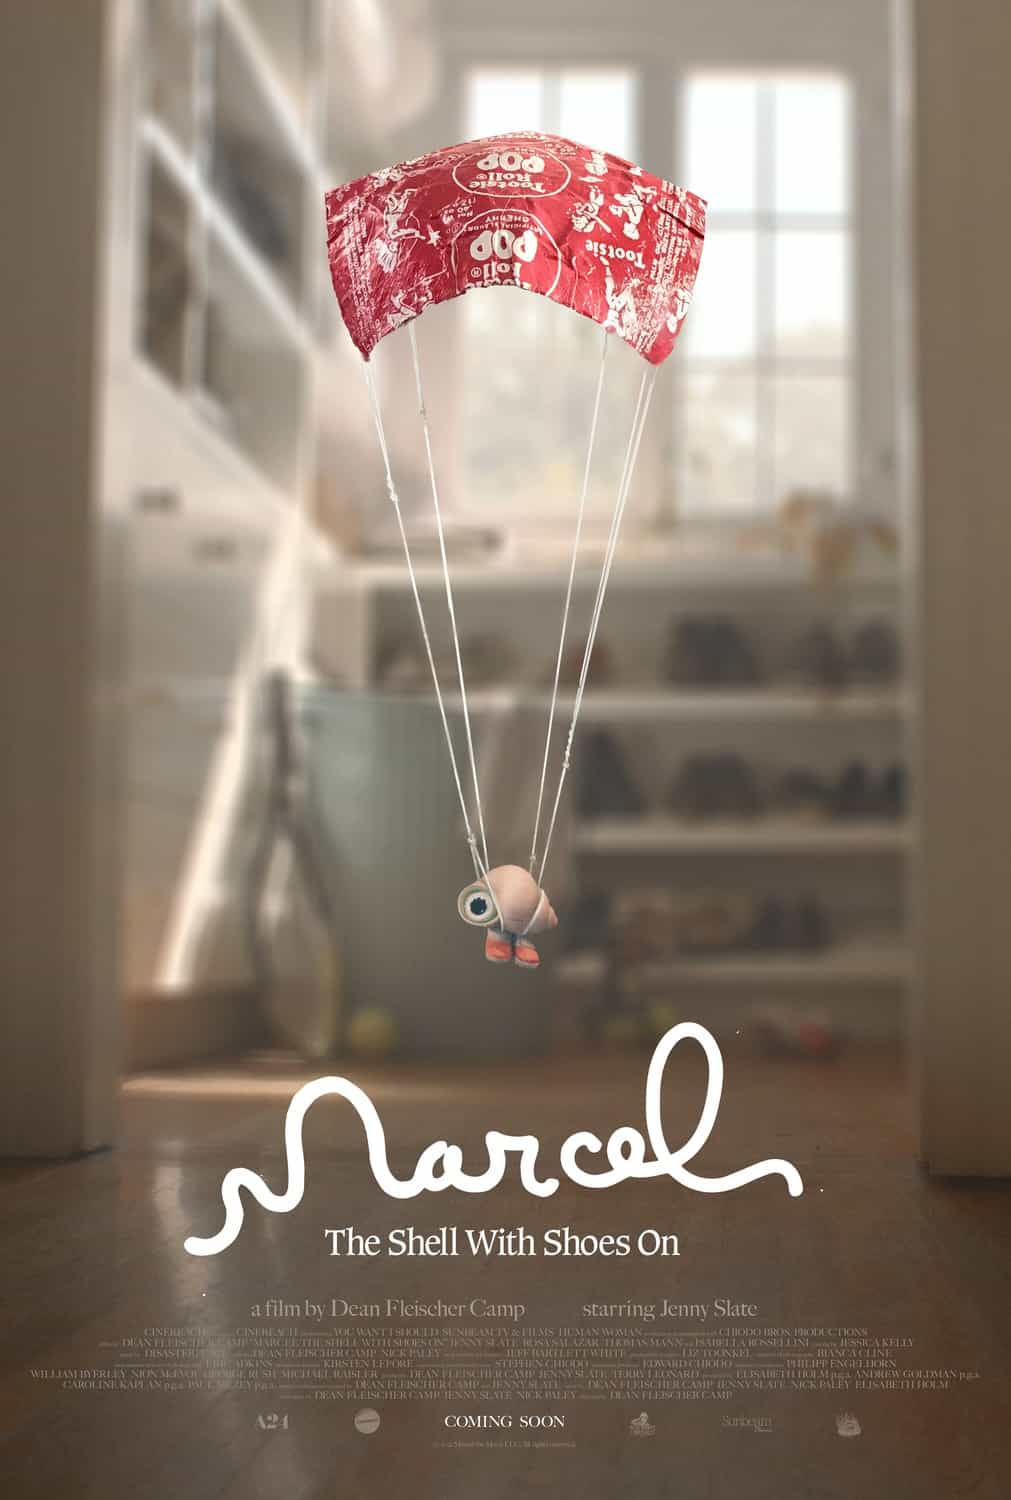 Marcel the Shell With Shoes On is given a PG age rating in the UK for mild upsetting scenes, rude humour, infrequent drug references